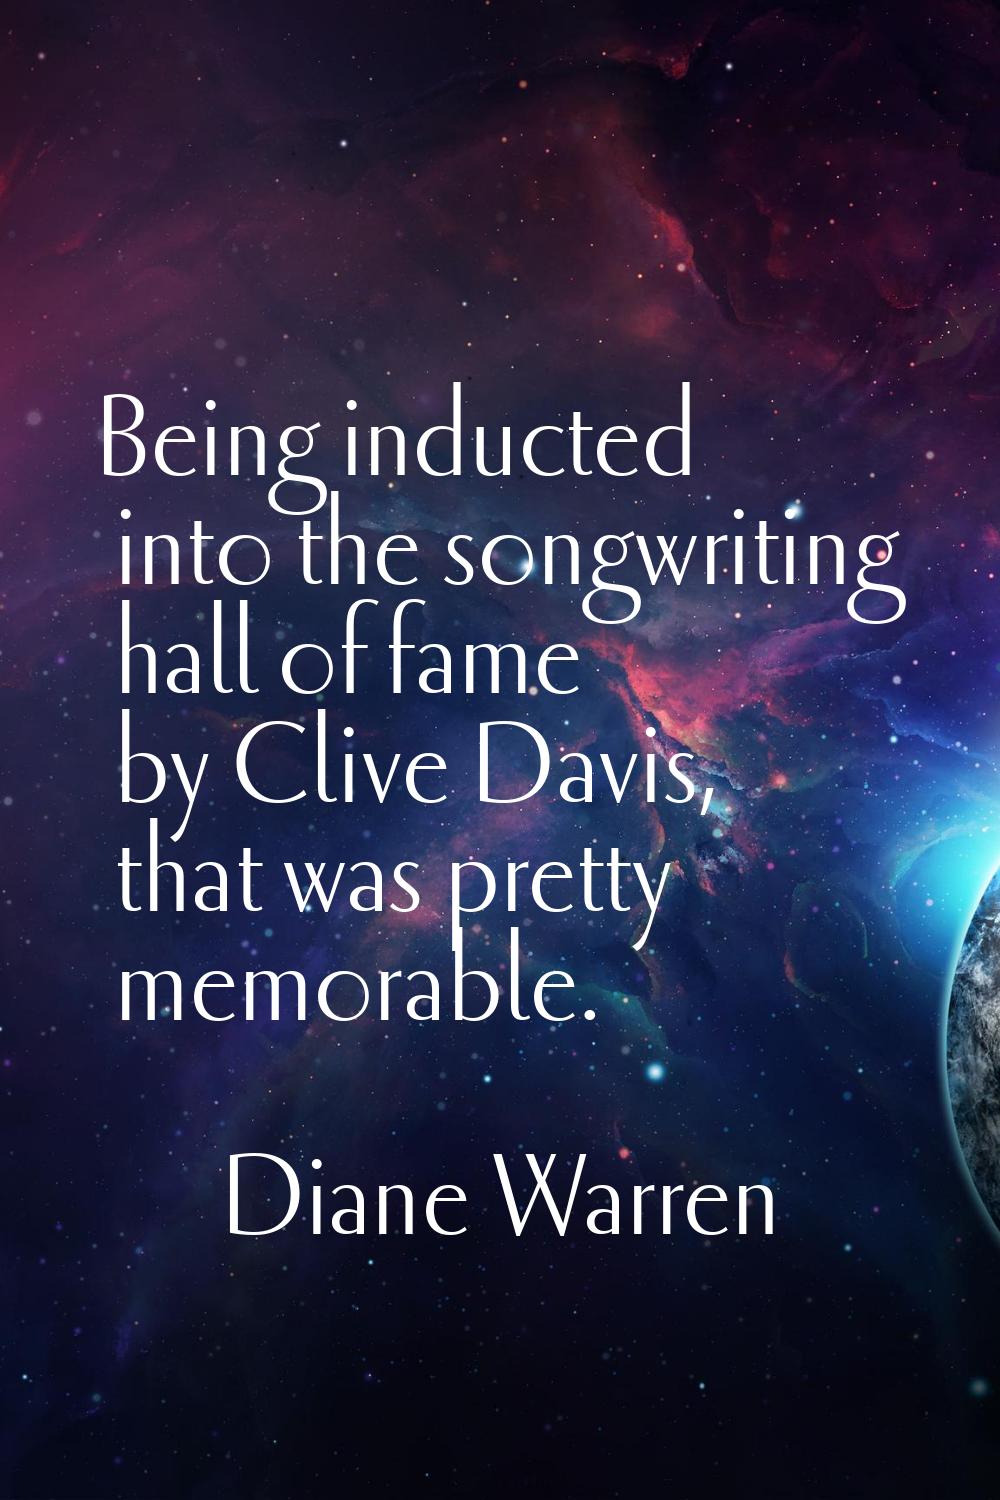 Being inducted into the songwriting hall of fame by Clive Davis, that was pretty memorable.